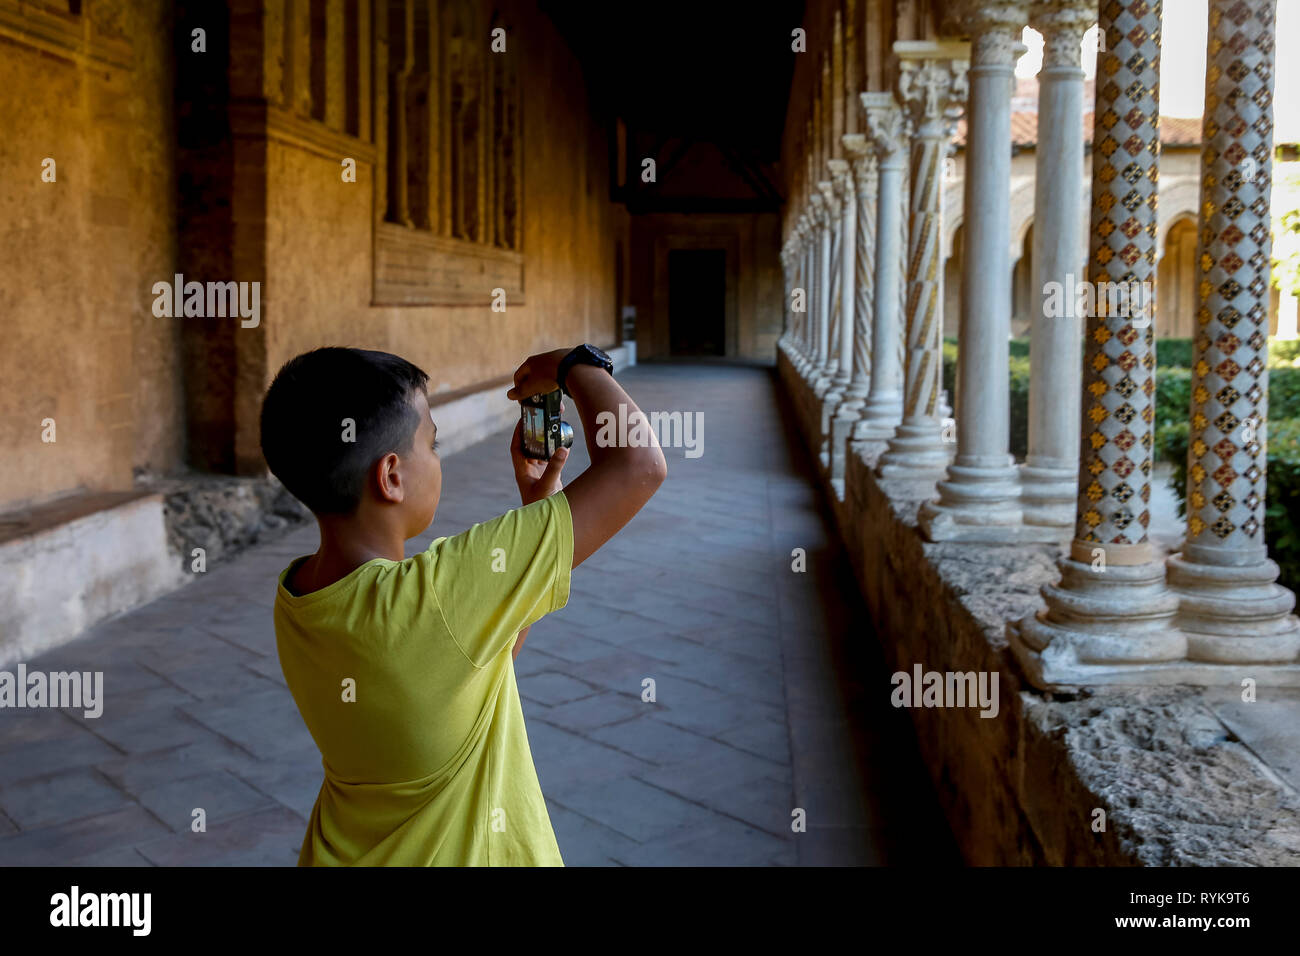 12-year-old boy taking a photograph in the cloister of Monreale cathedral, Sicily (Italy). Stock Photo